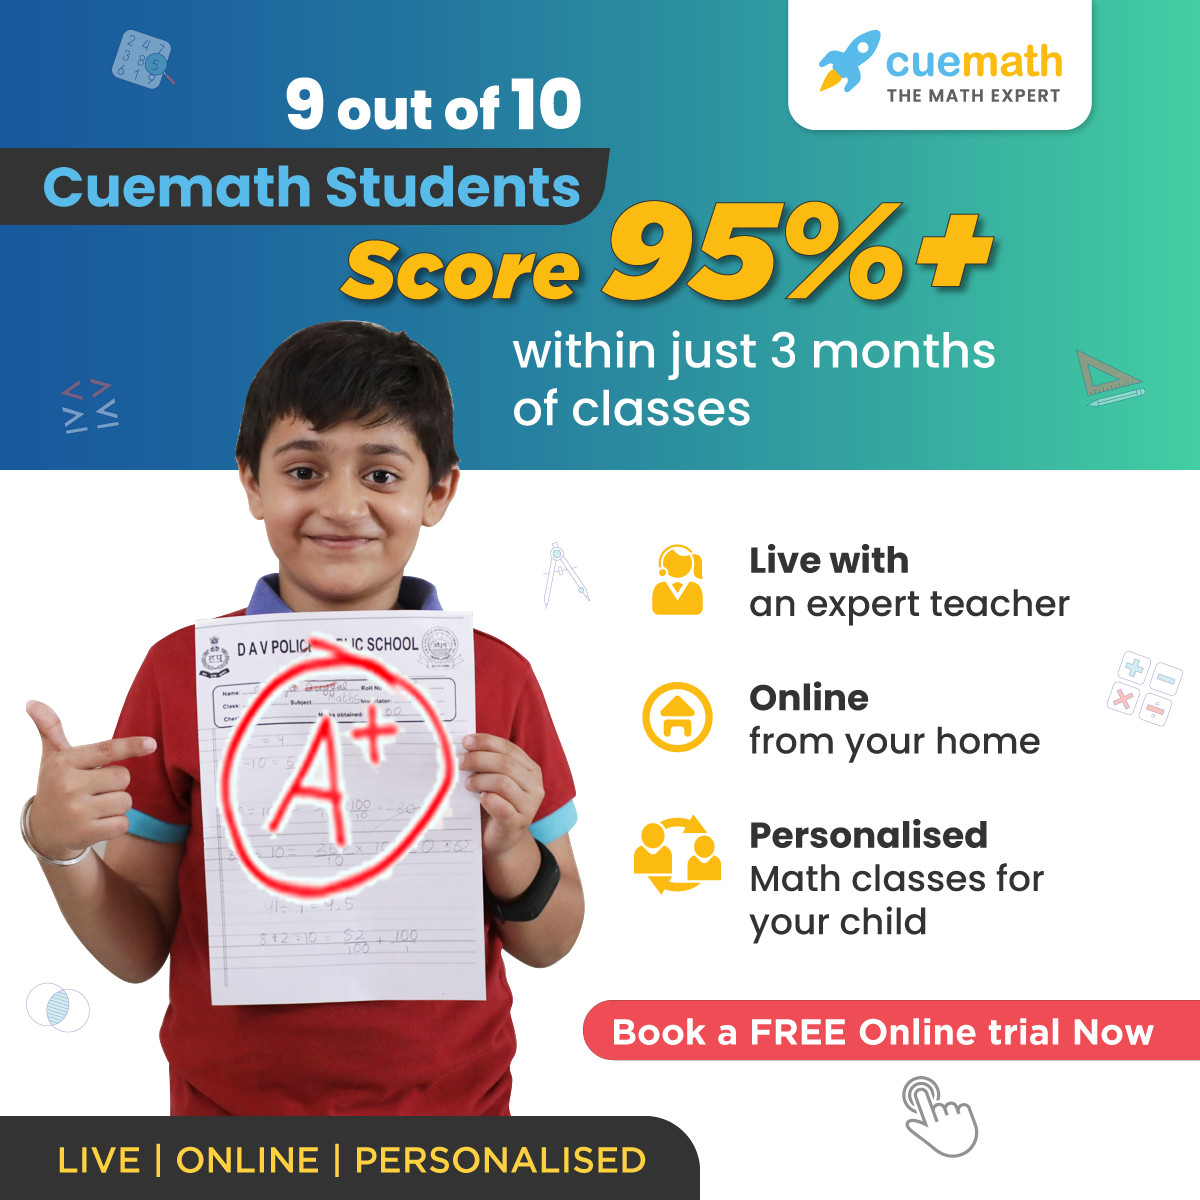 Are you looking for Online Live Math classes for your kids during this COVID scare? Then read this post to know various programs by Cuemath and Online Cuemath summer camp 2020 for kids right from kindergarten to class 10. #cuemath #summercamp2020 #liveclasses #onlineclasses #onlinemathclasses #education #learningmath #mathclasses #mathtutions #onlinemathtutions 